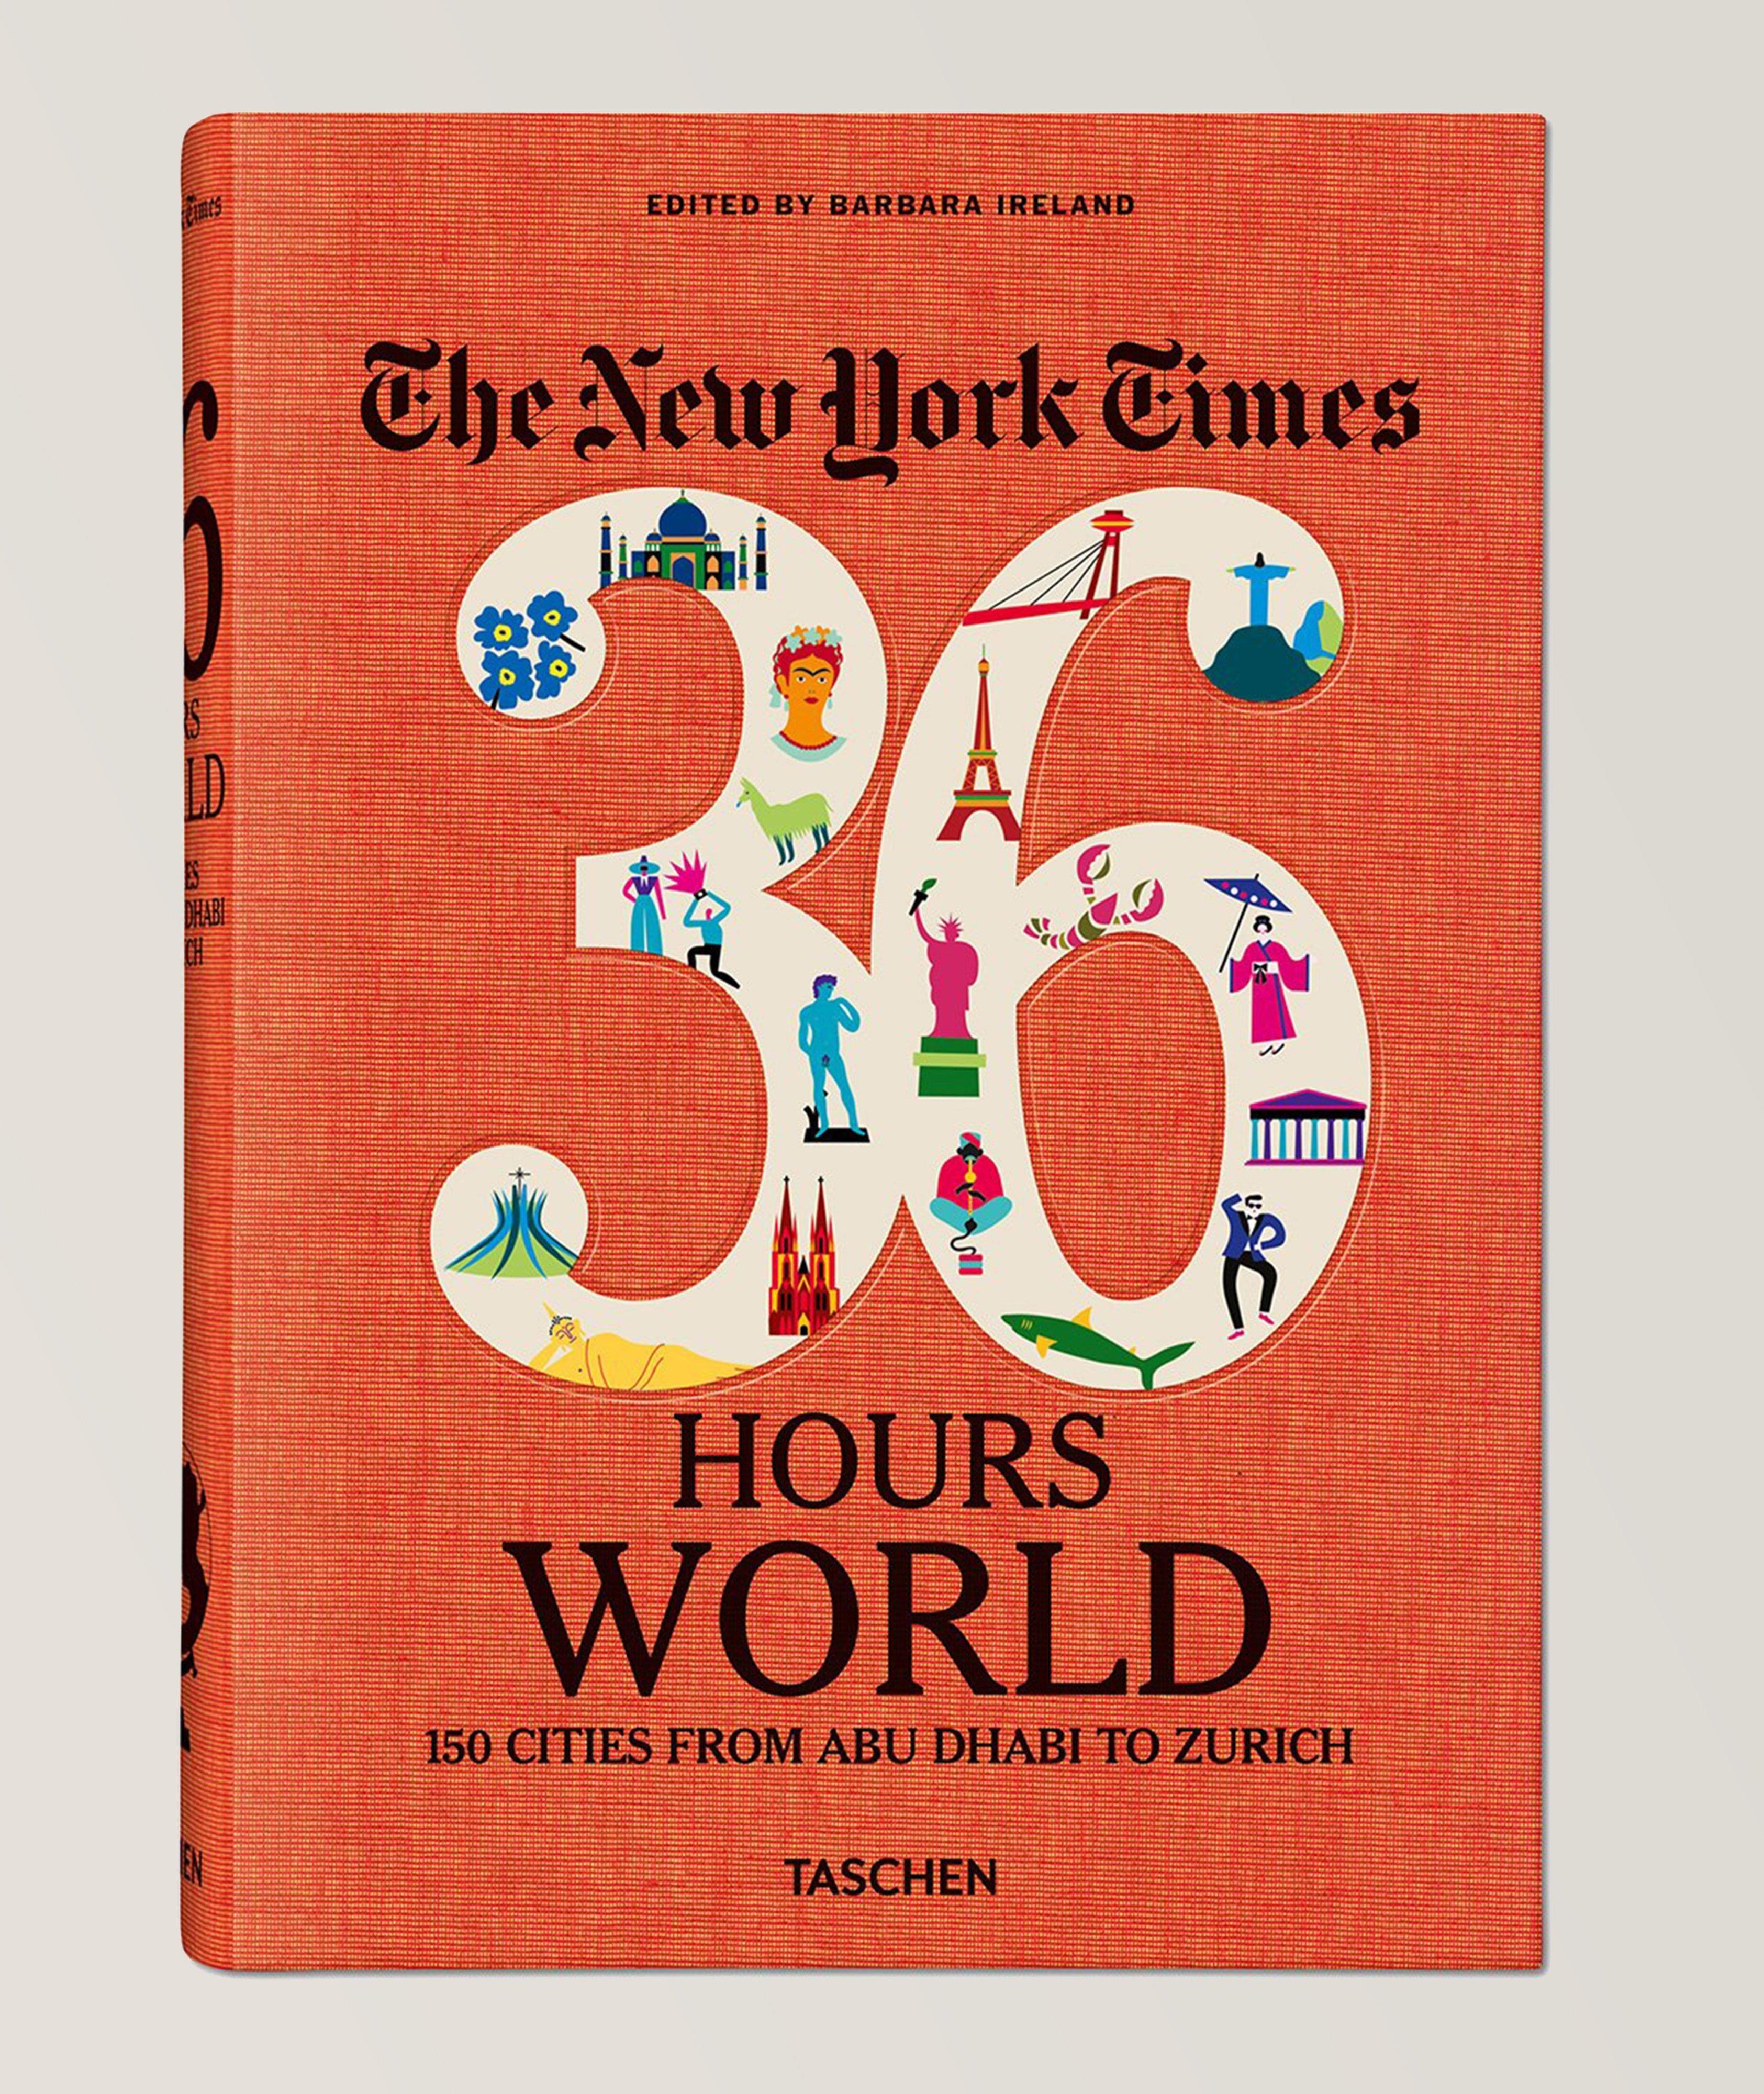 The New York Times 36 Hours, World Book